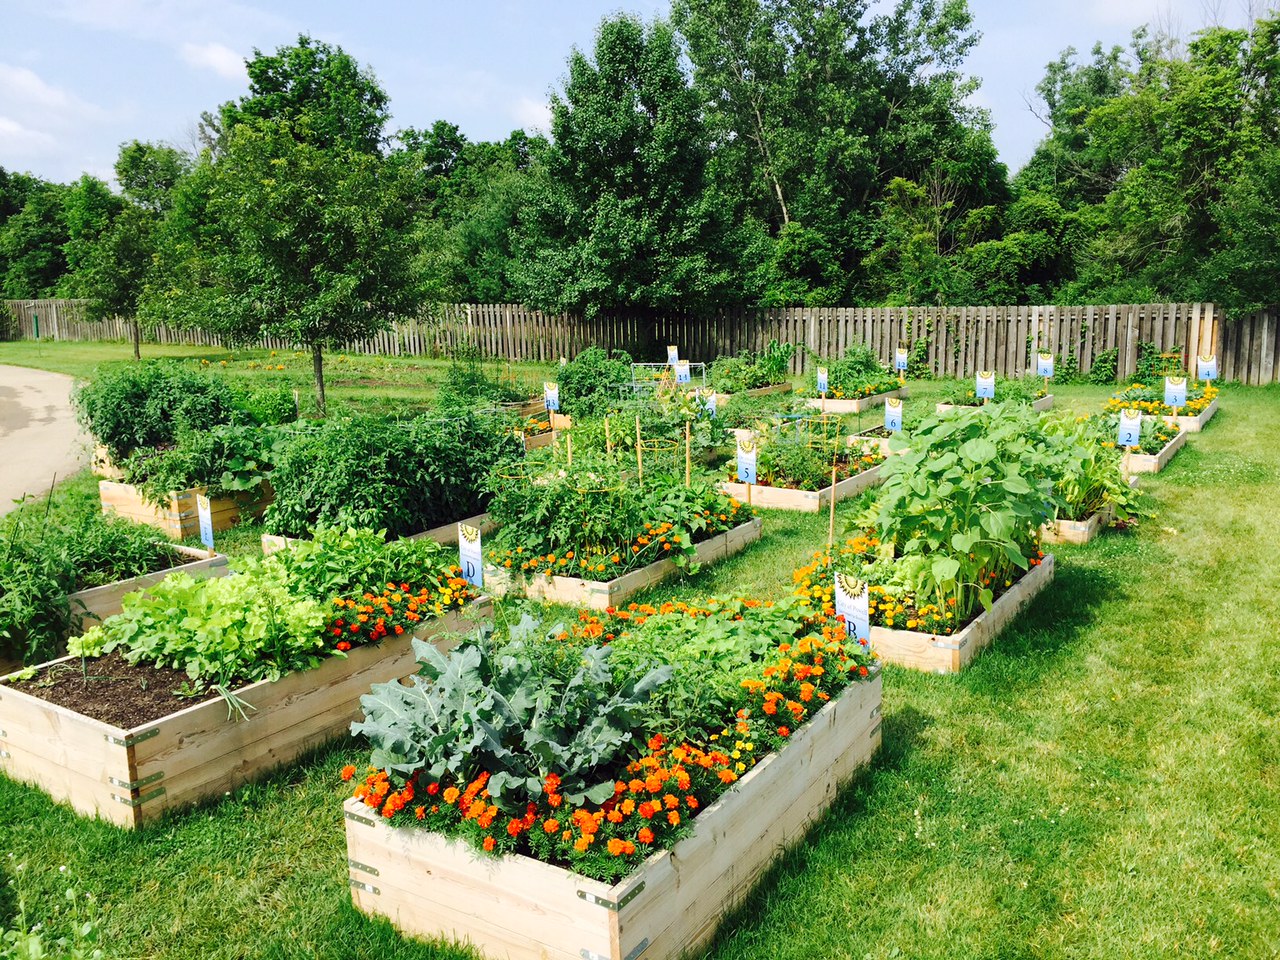 The easiest vegetables to grow in garden beds and containers Cover Photo